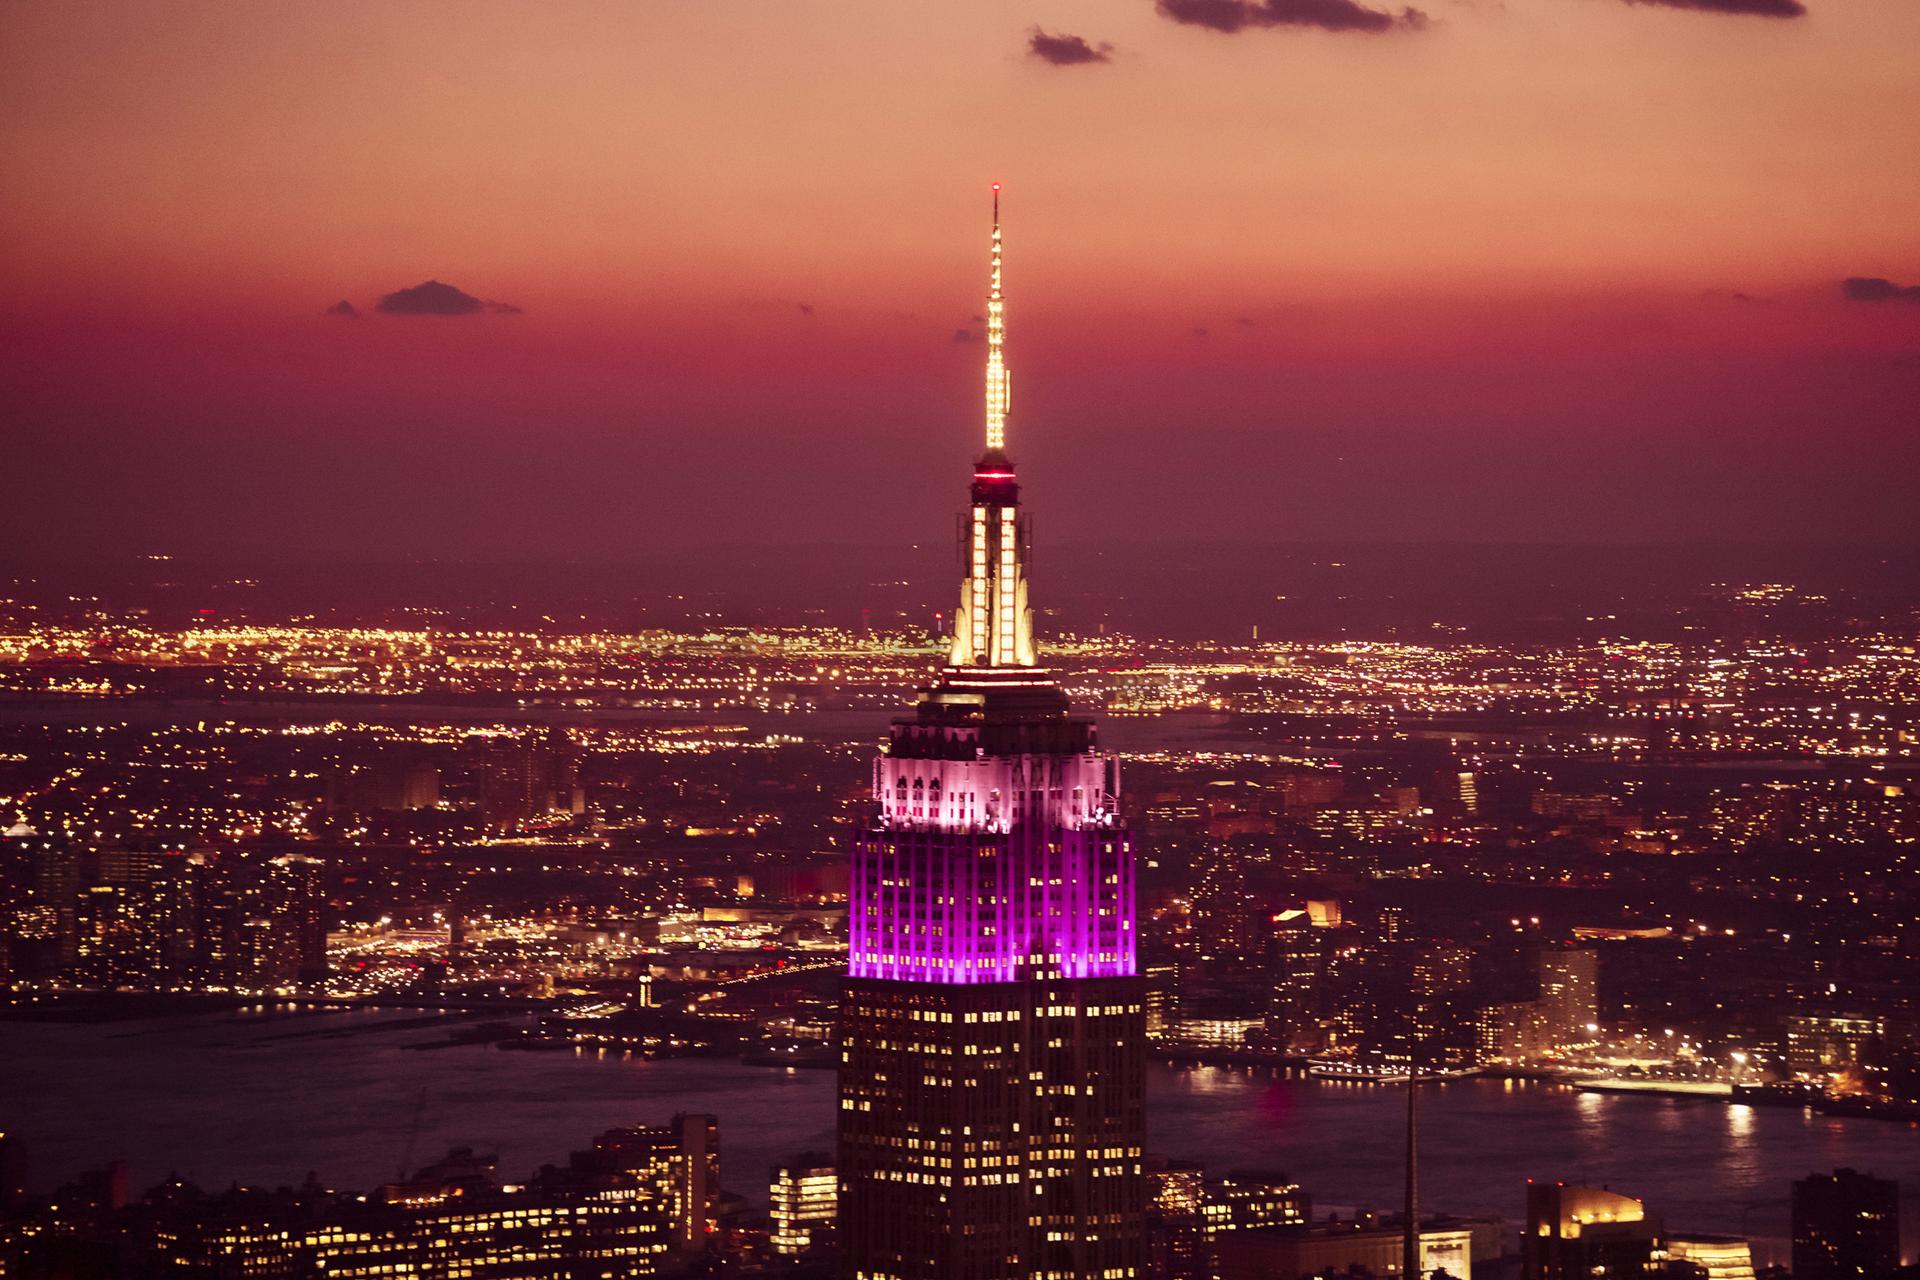 View of the Empire State Building observatory at dusk in Manhattan, NYC